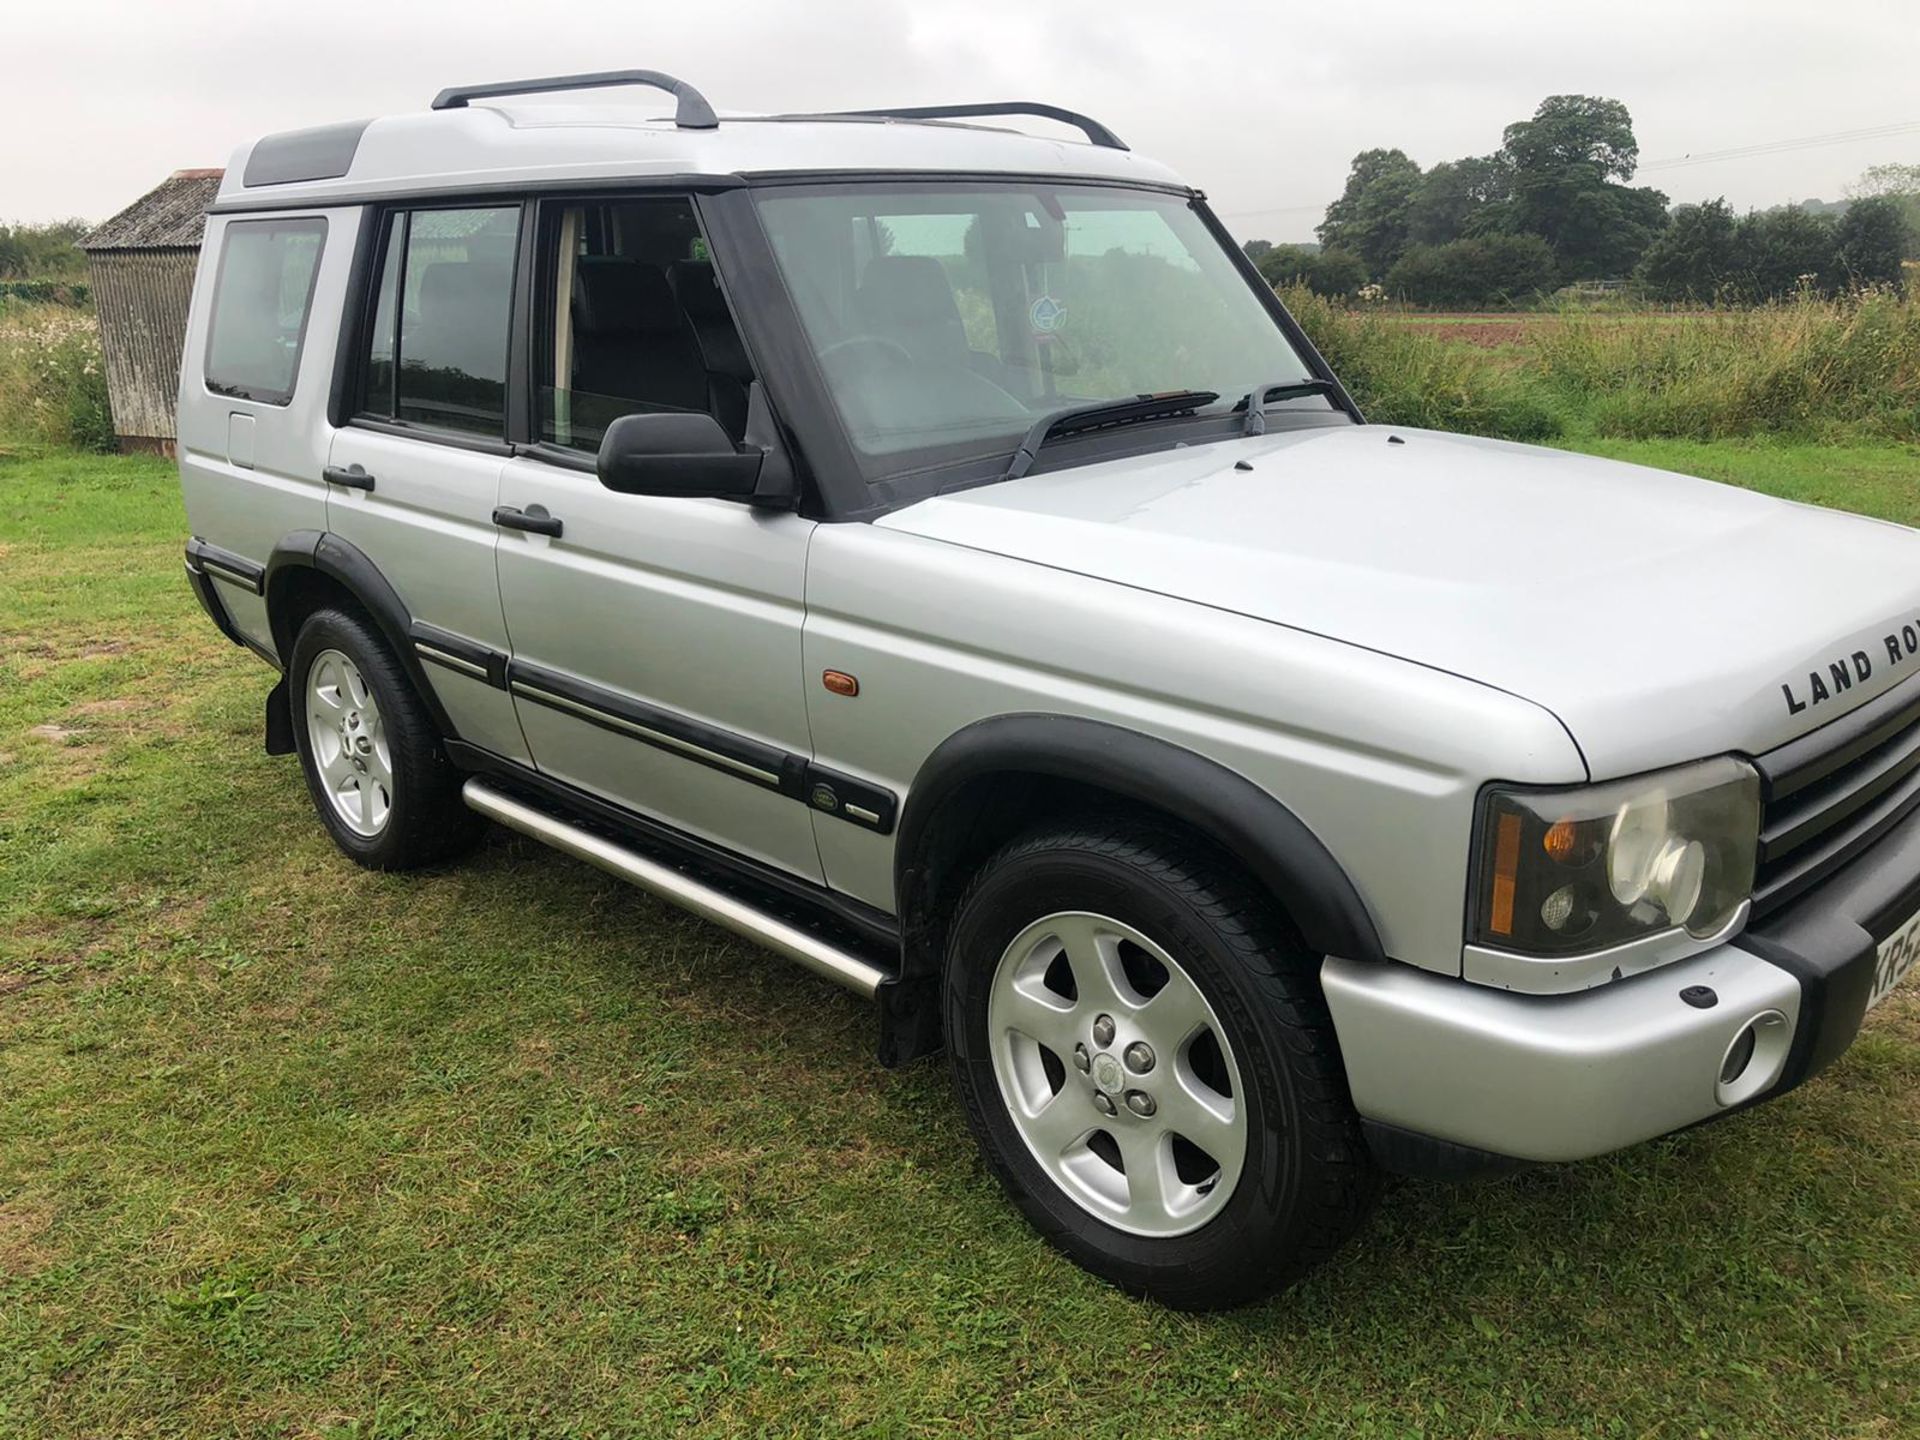 2002 LAND ROVER DISCOVERY TD5 ES AUTO SILVER 7 SEATER ESTATE, 2.5 DIESEL, 160K MILES *NO VAT*